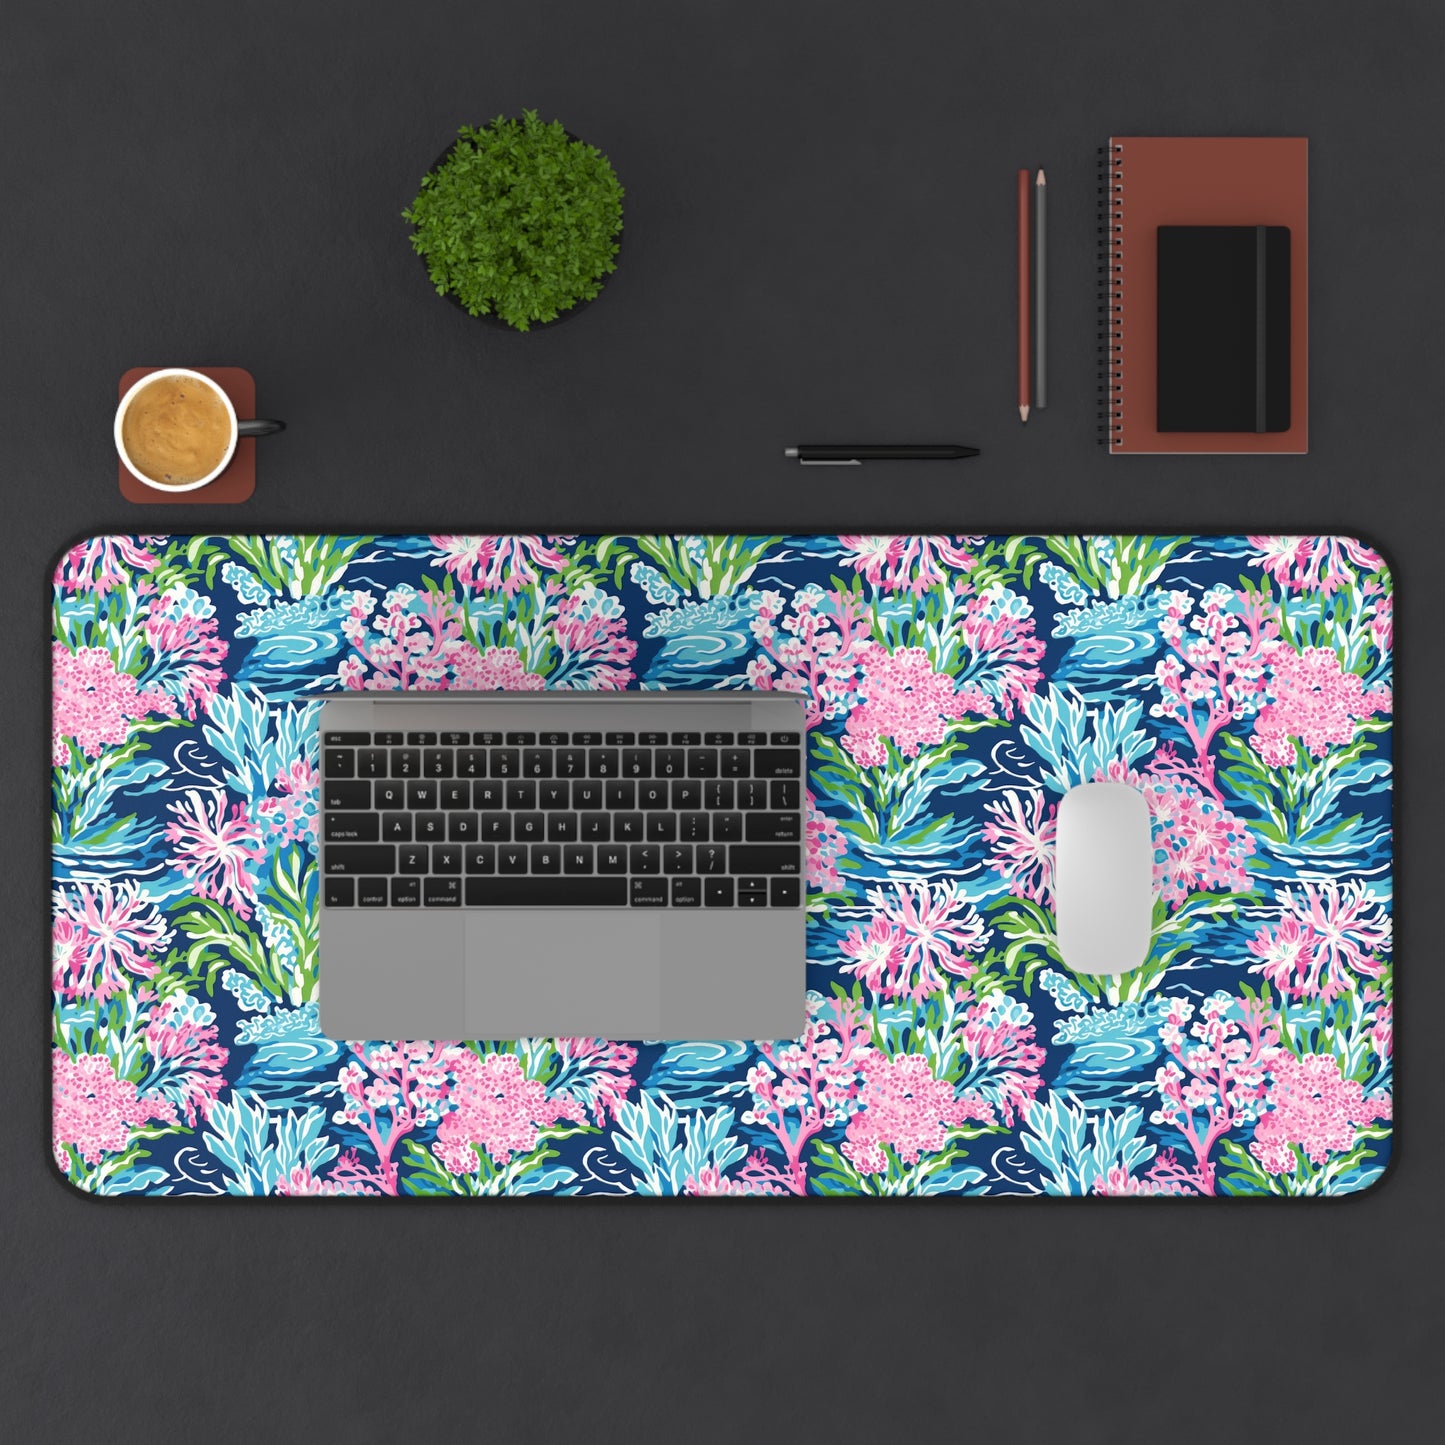 Blush Blossoms: Watercolor Water Garden Adorned with Pink Flowers Desk Mat Extended Gaming Mouse Pad - 3 Sizes